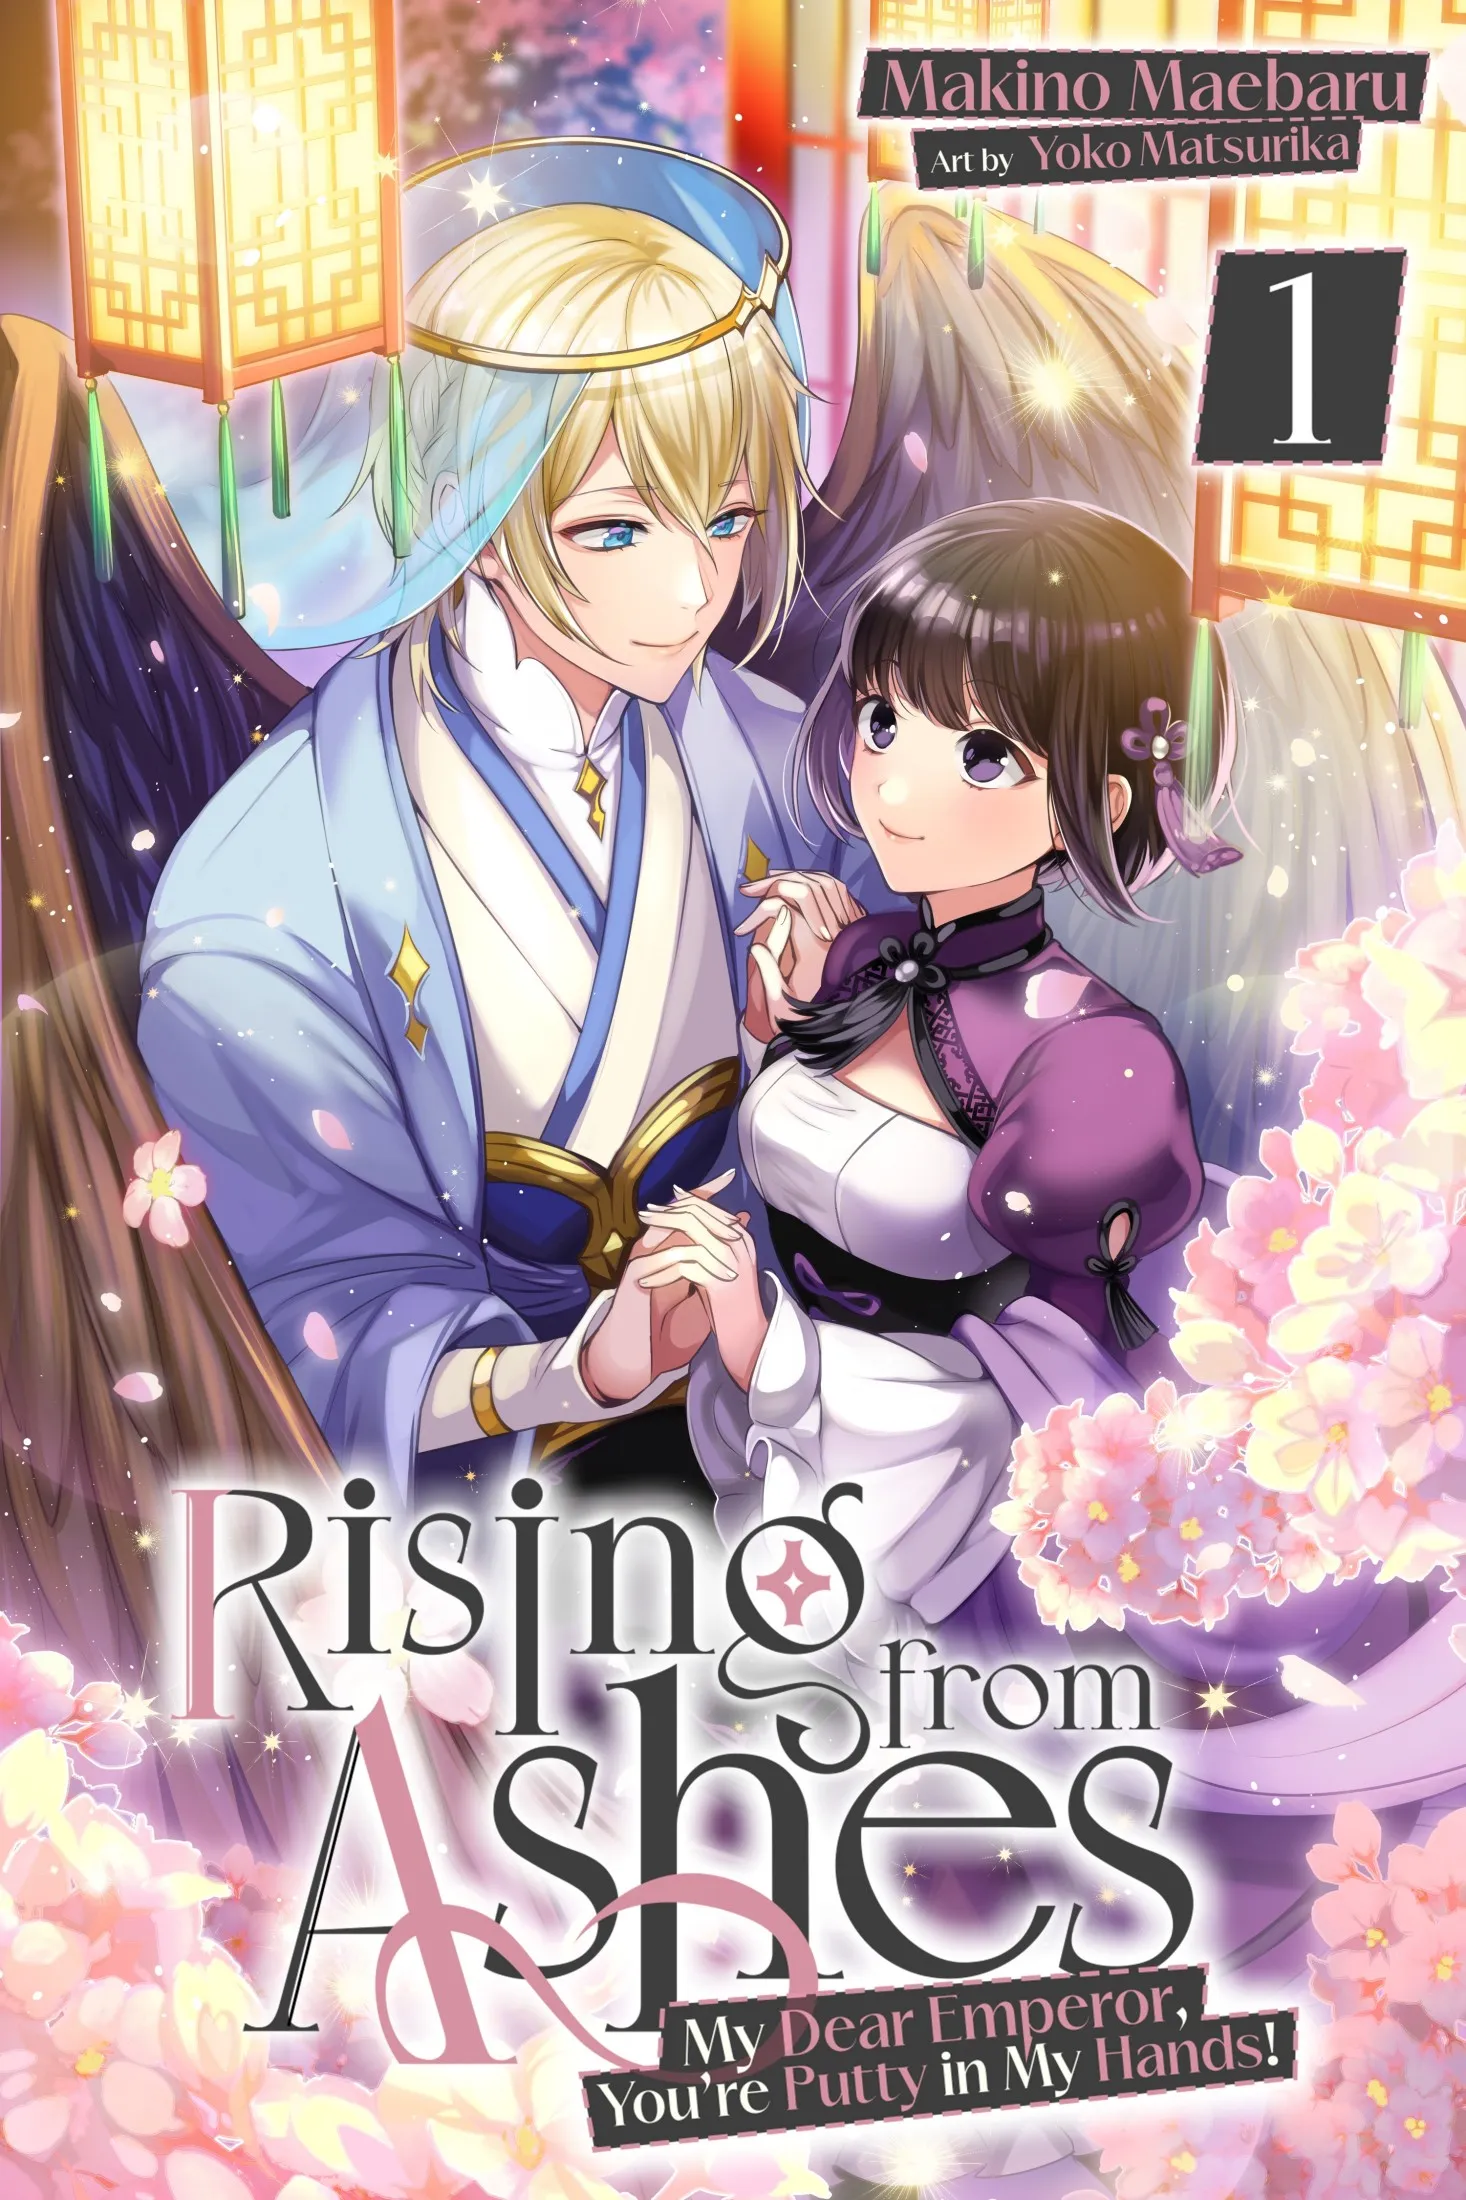 Rising from Ashes: My Dear Emperor&#44; You’re Putty in My Hands! Vol.1 (Rising from Ashes #1)